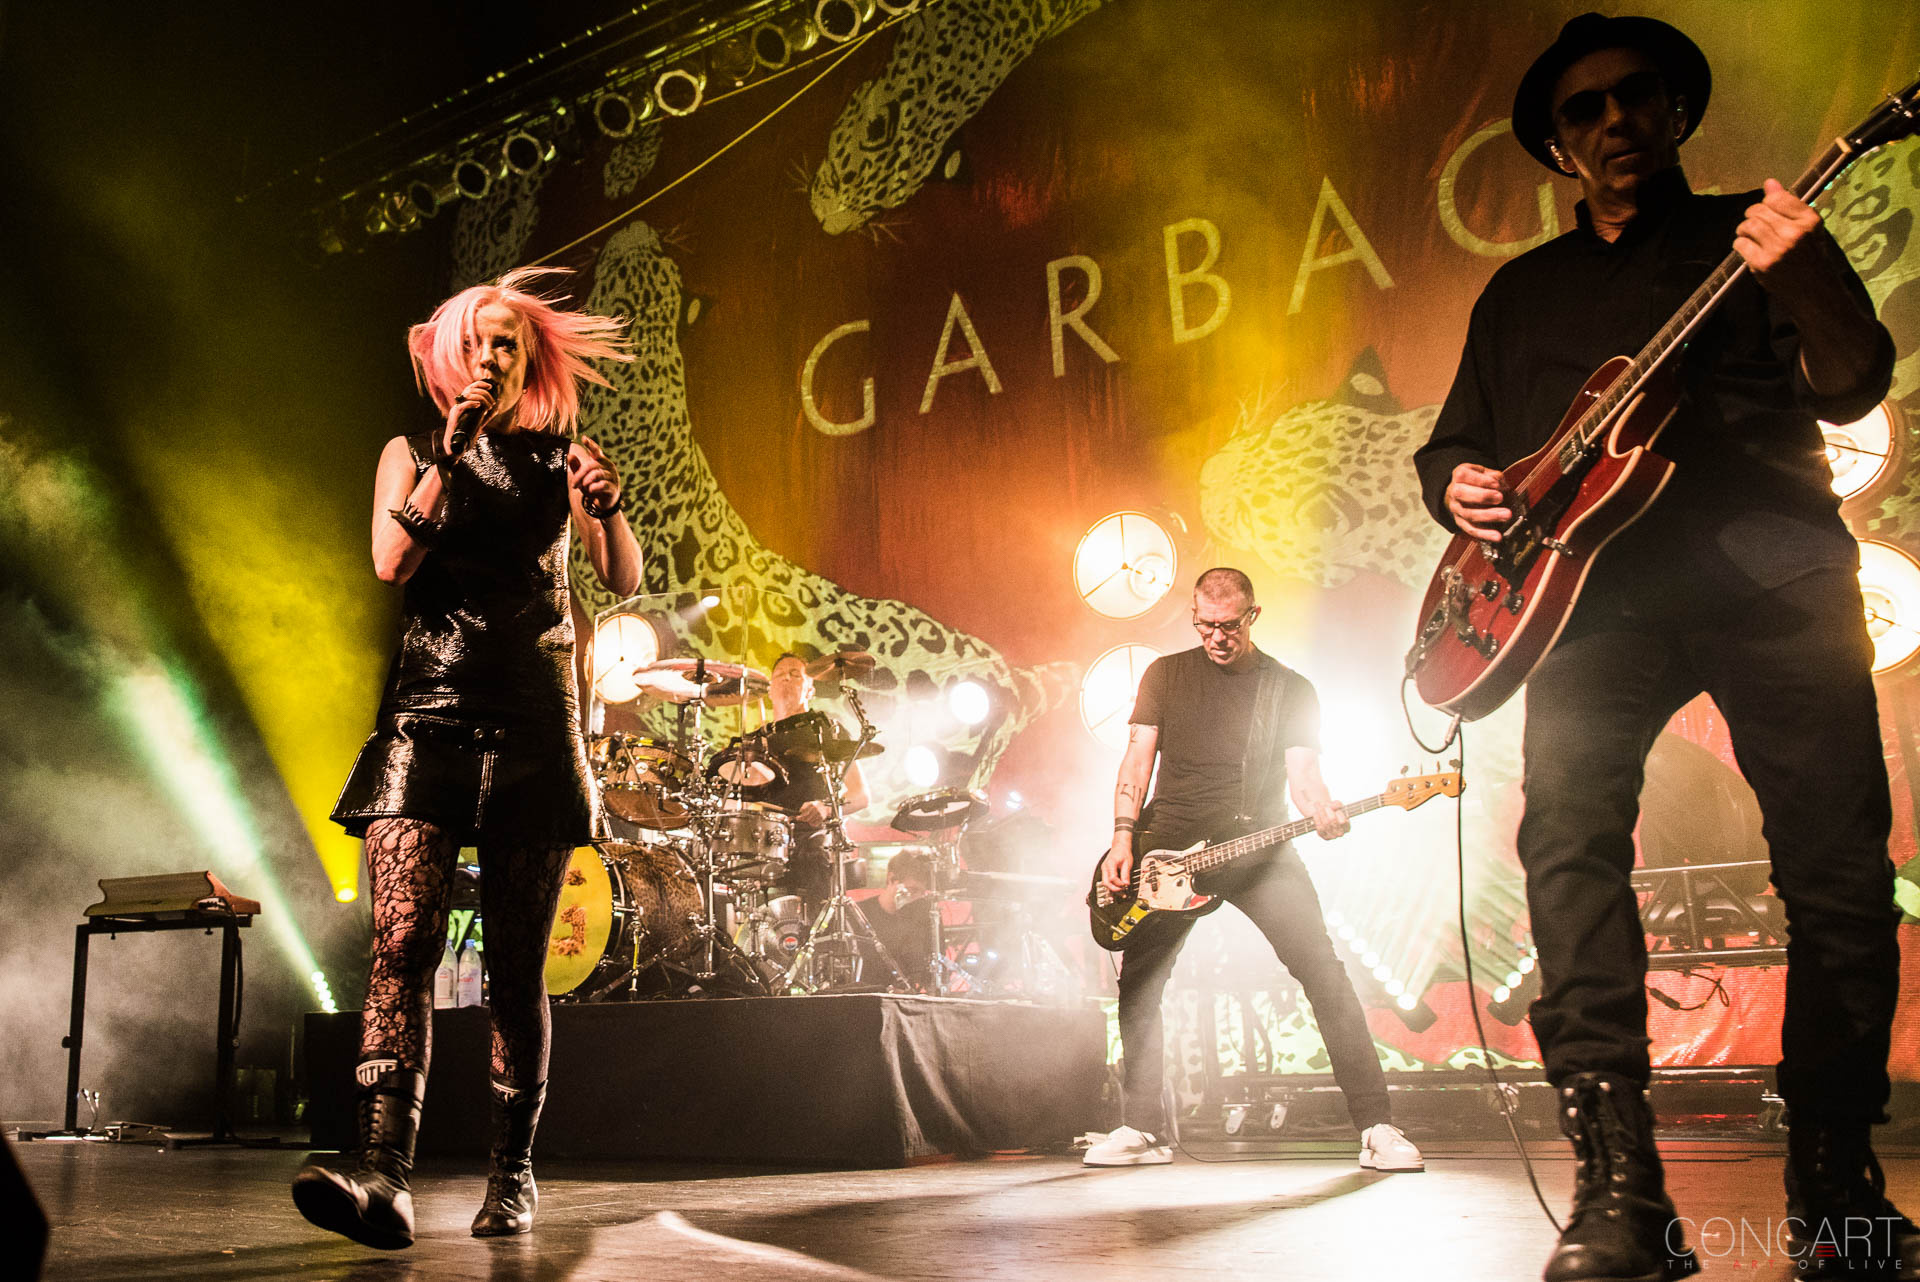 Concert photos, Garbage at the Egyptian Room, Indy 2016 concert, The art of live, 1920x1290 HD Desktop